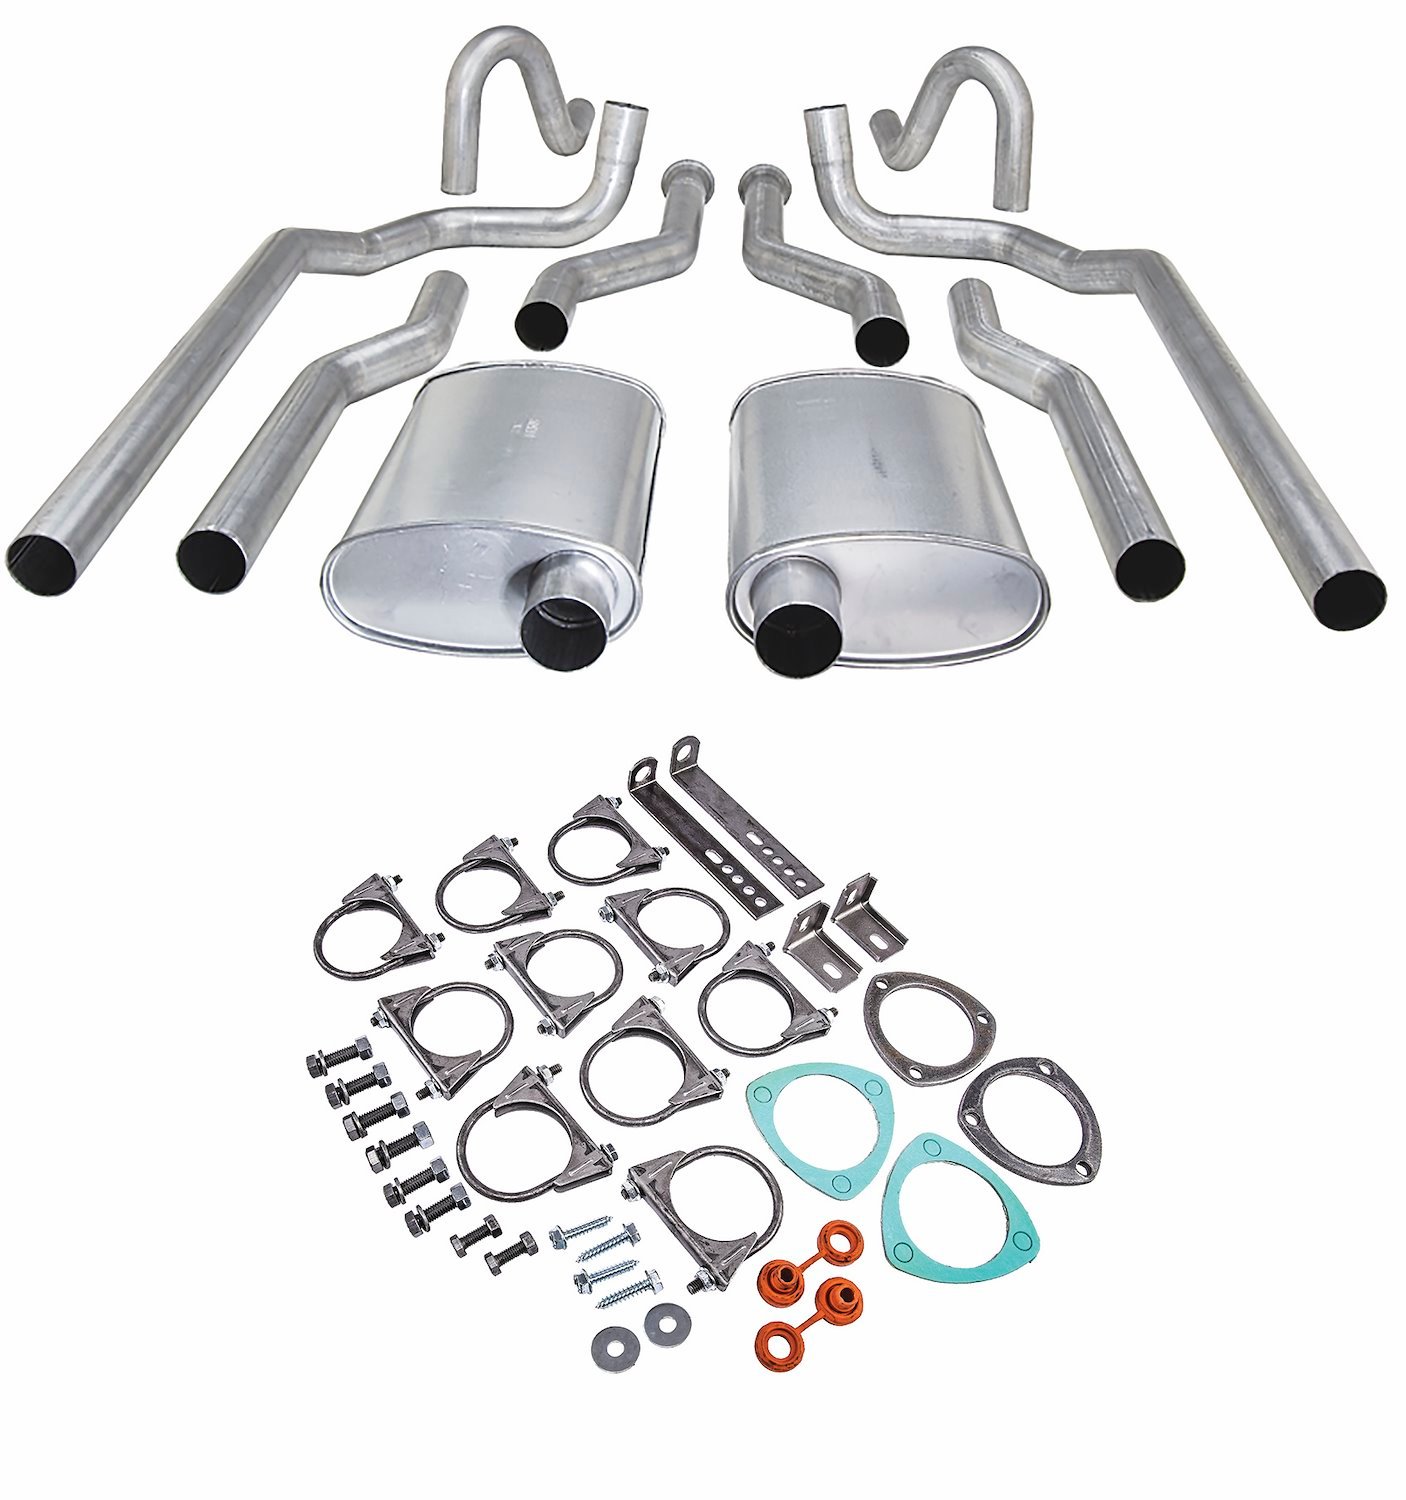 Header-Back Dual 2 1/2 in. Exhaust Kit Fits Select 1964-1972 Buick, Chevrolet, Pontiac, Oldsmobile Models